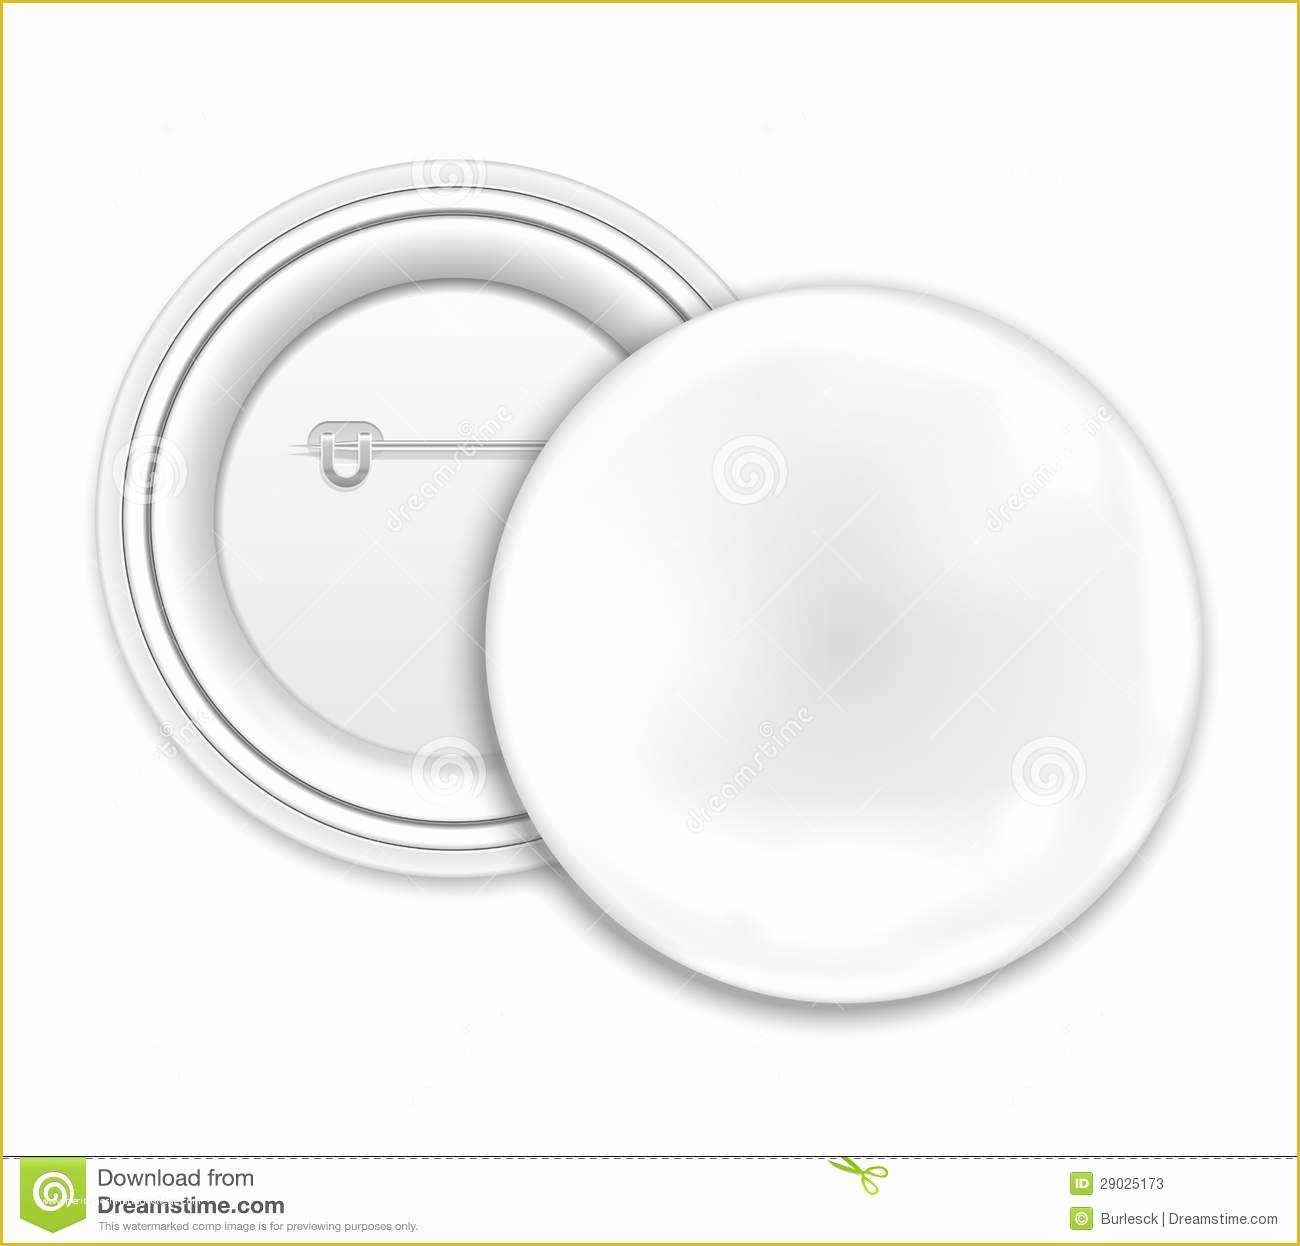 Campaign button Template Free Download Of Blank button Badge Stock S Image